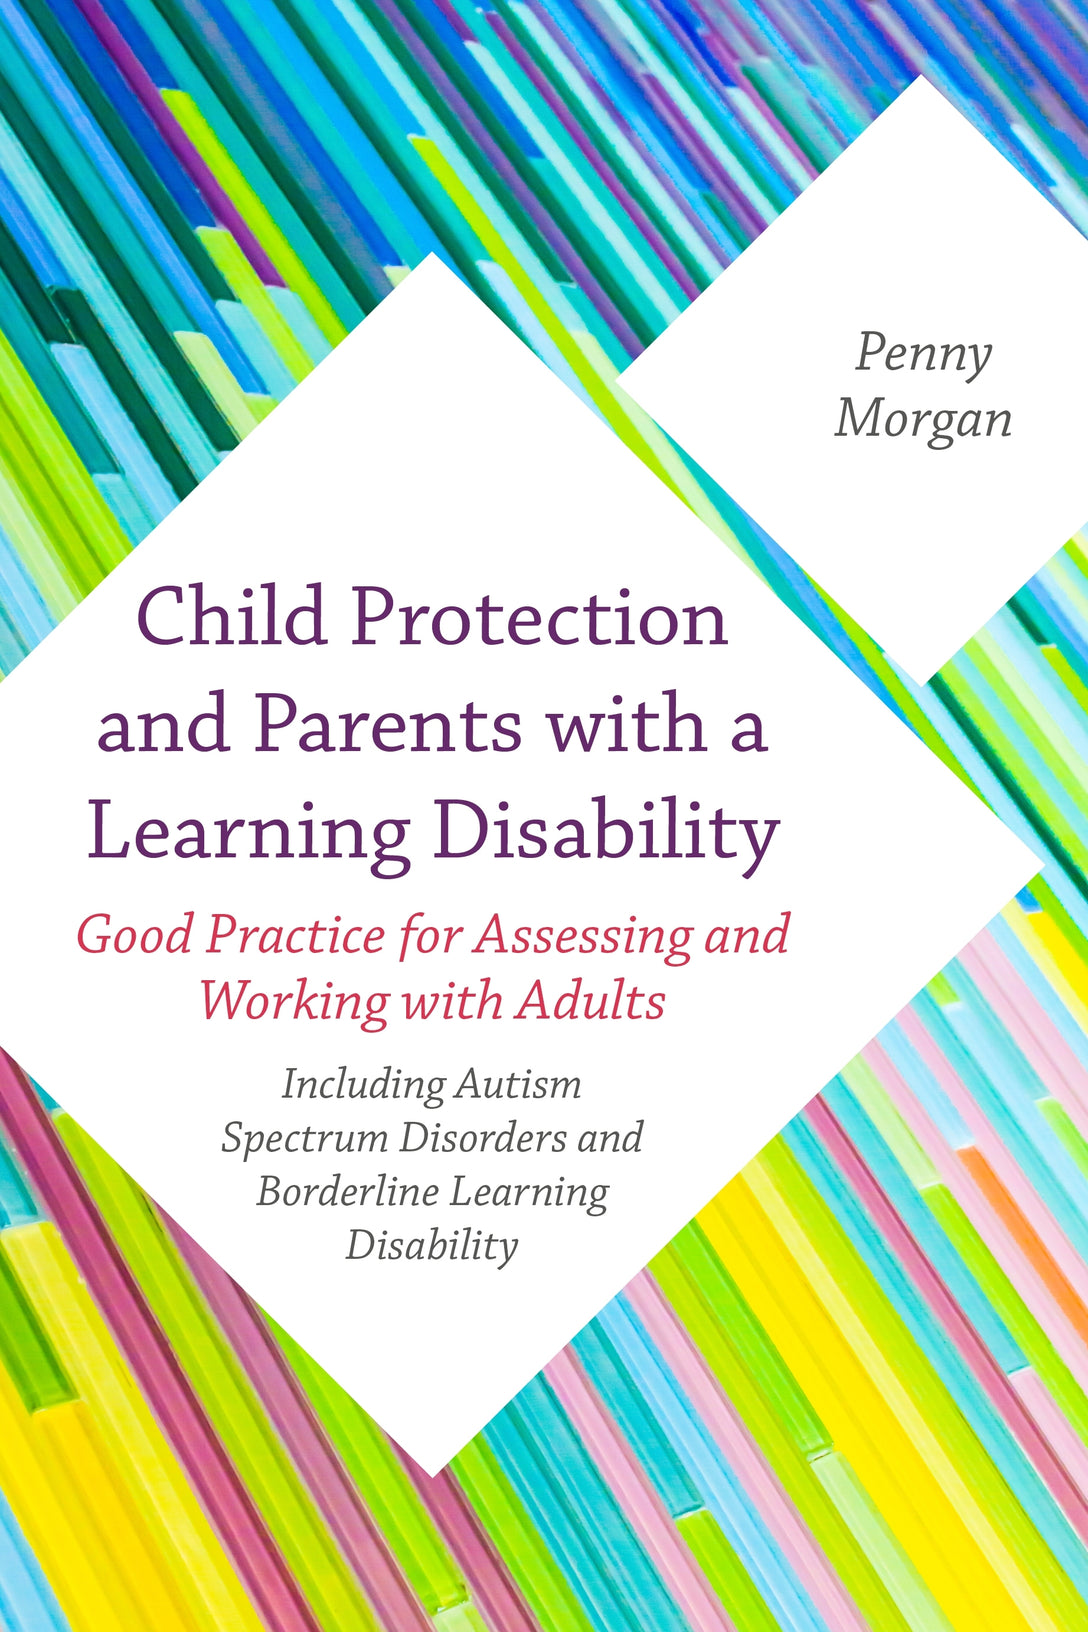 Child Protection and Parents with a Learning Disability by Penny Morgan